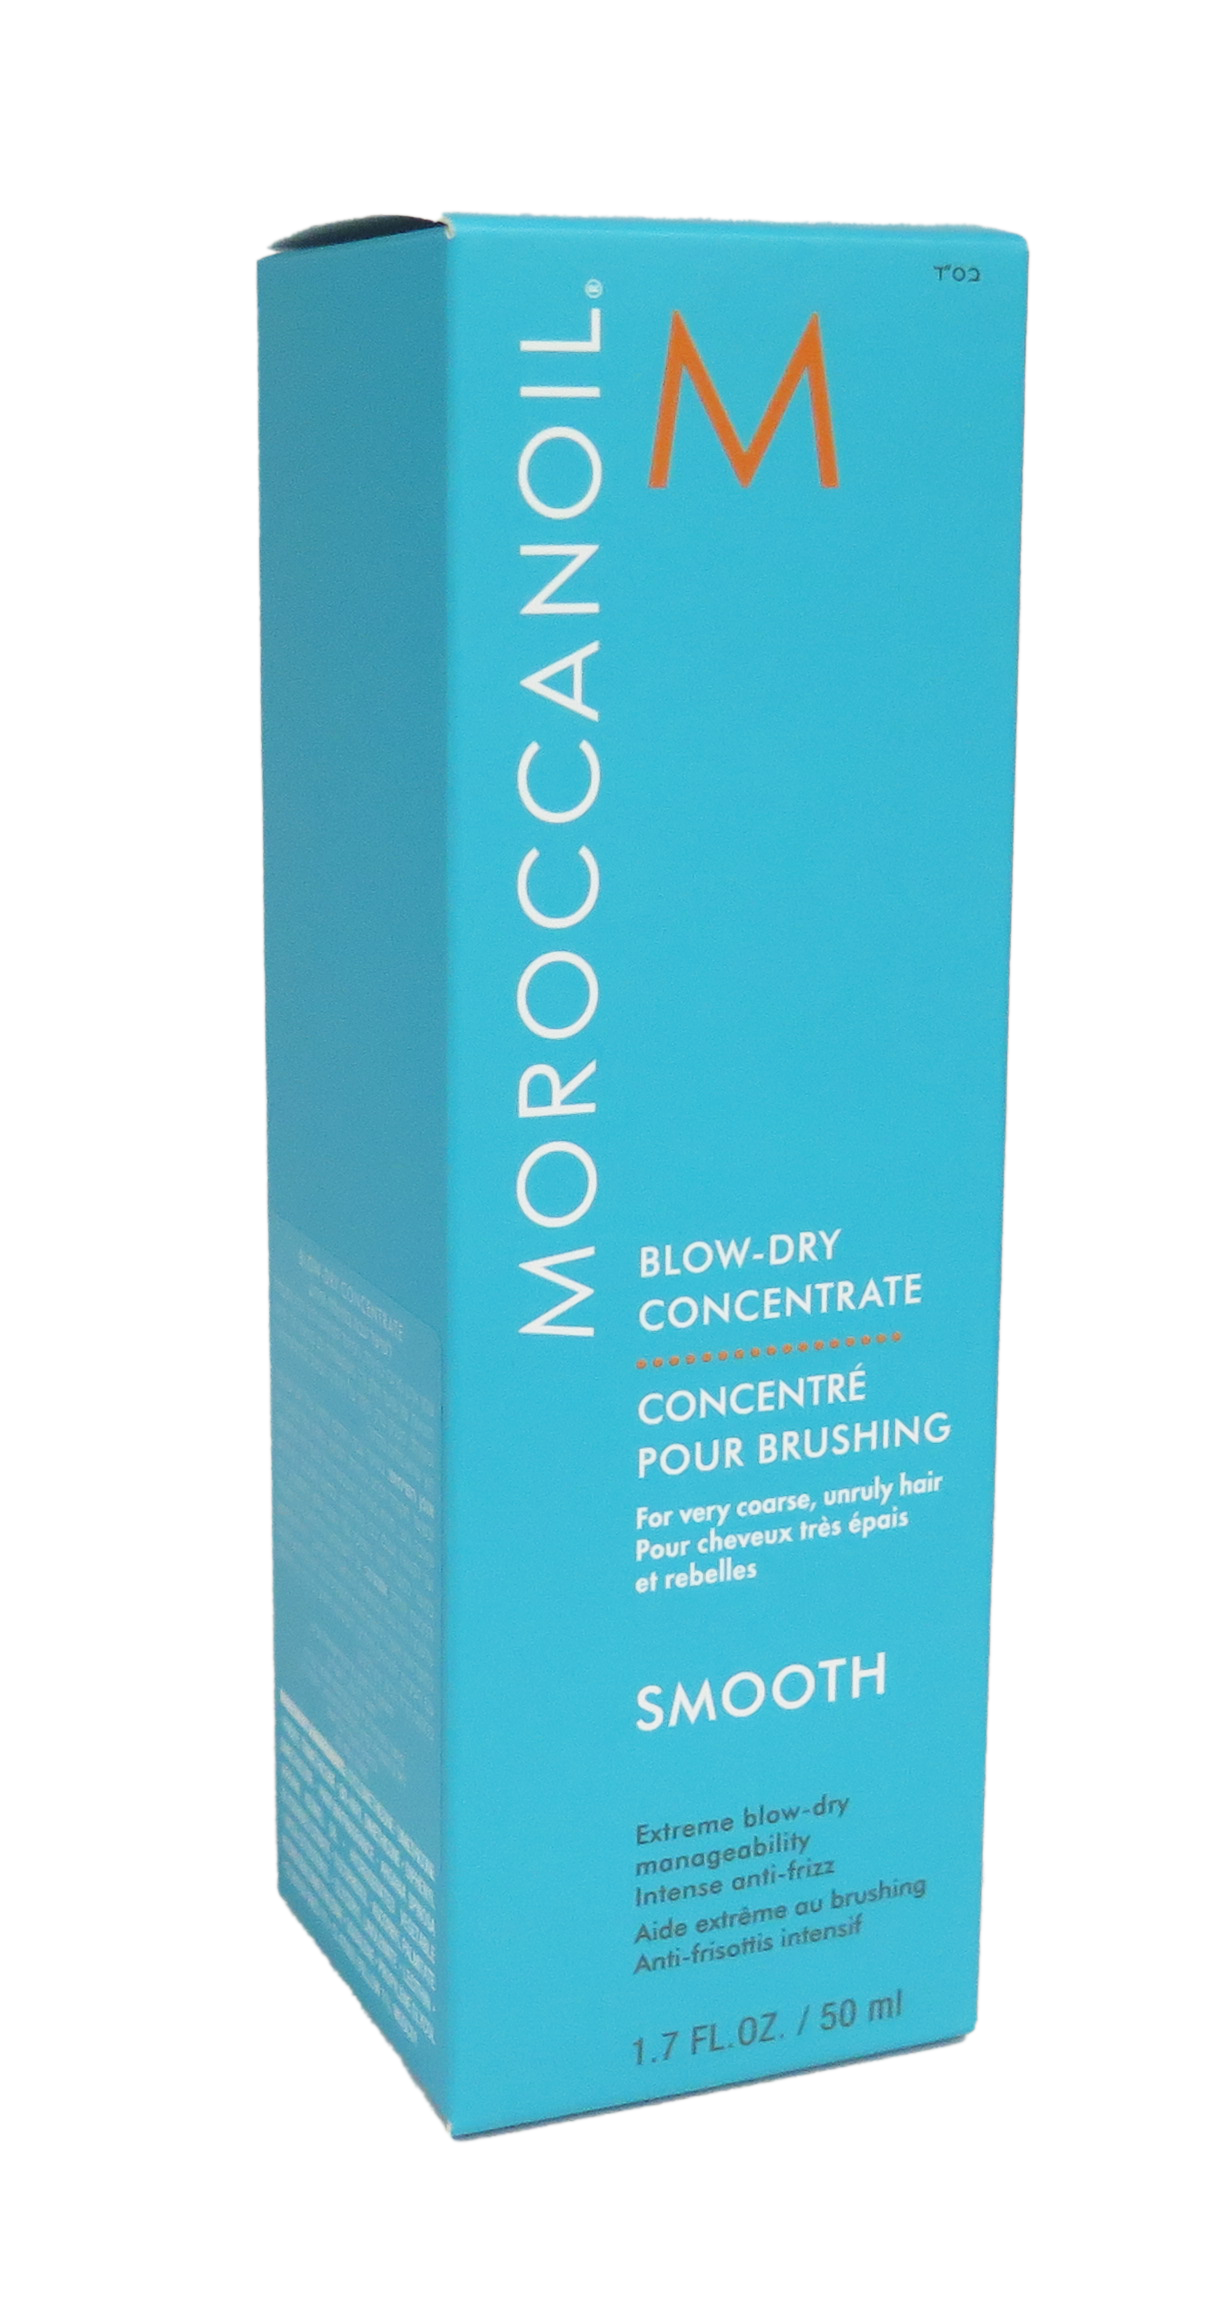 Moroccanoil Blow Dry Concentrate Smooth 1.7 fl oz